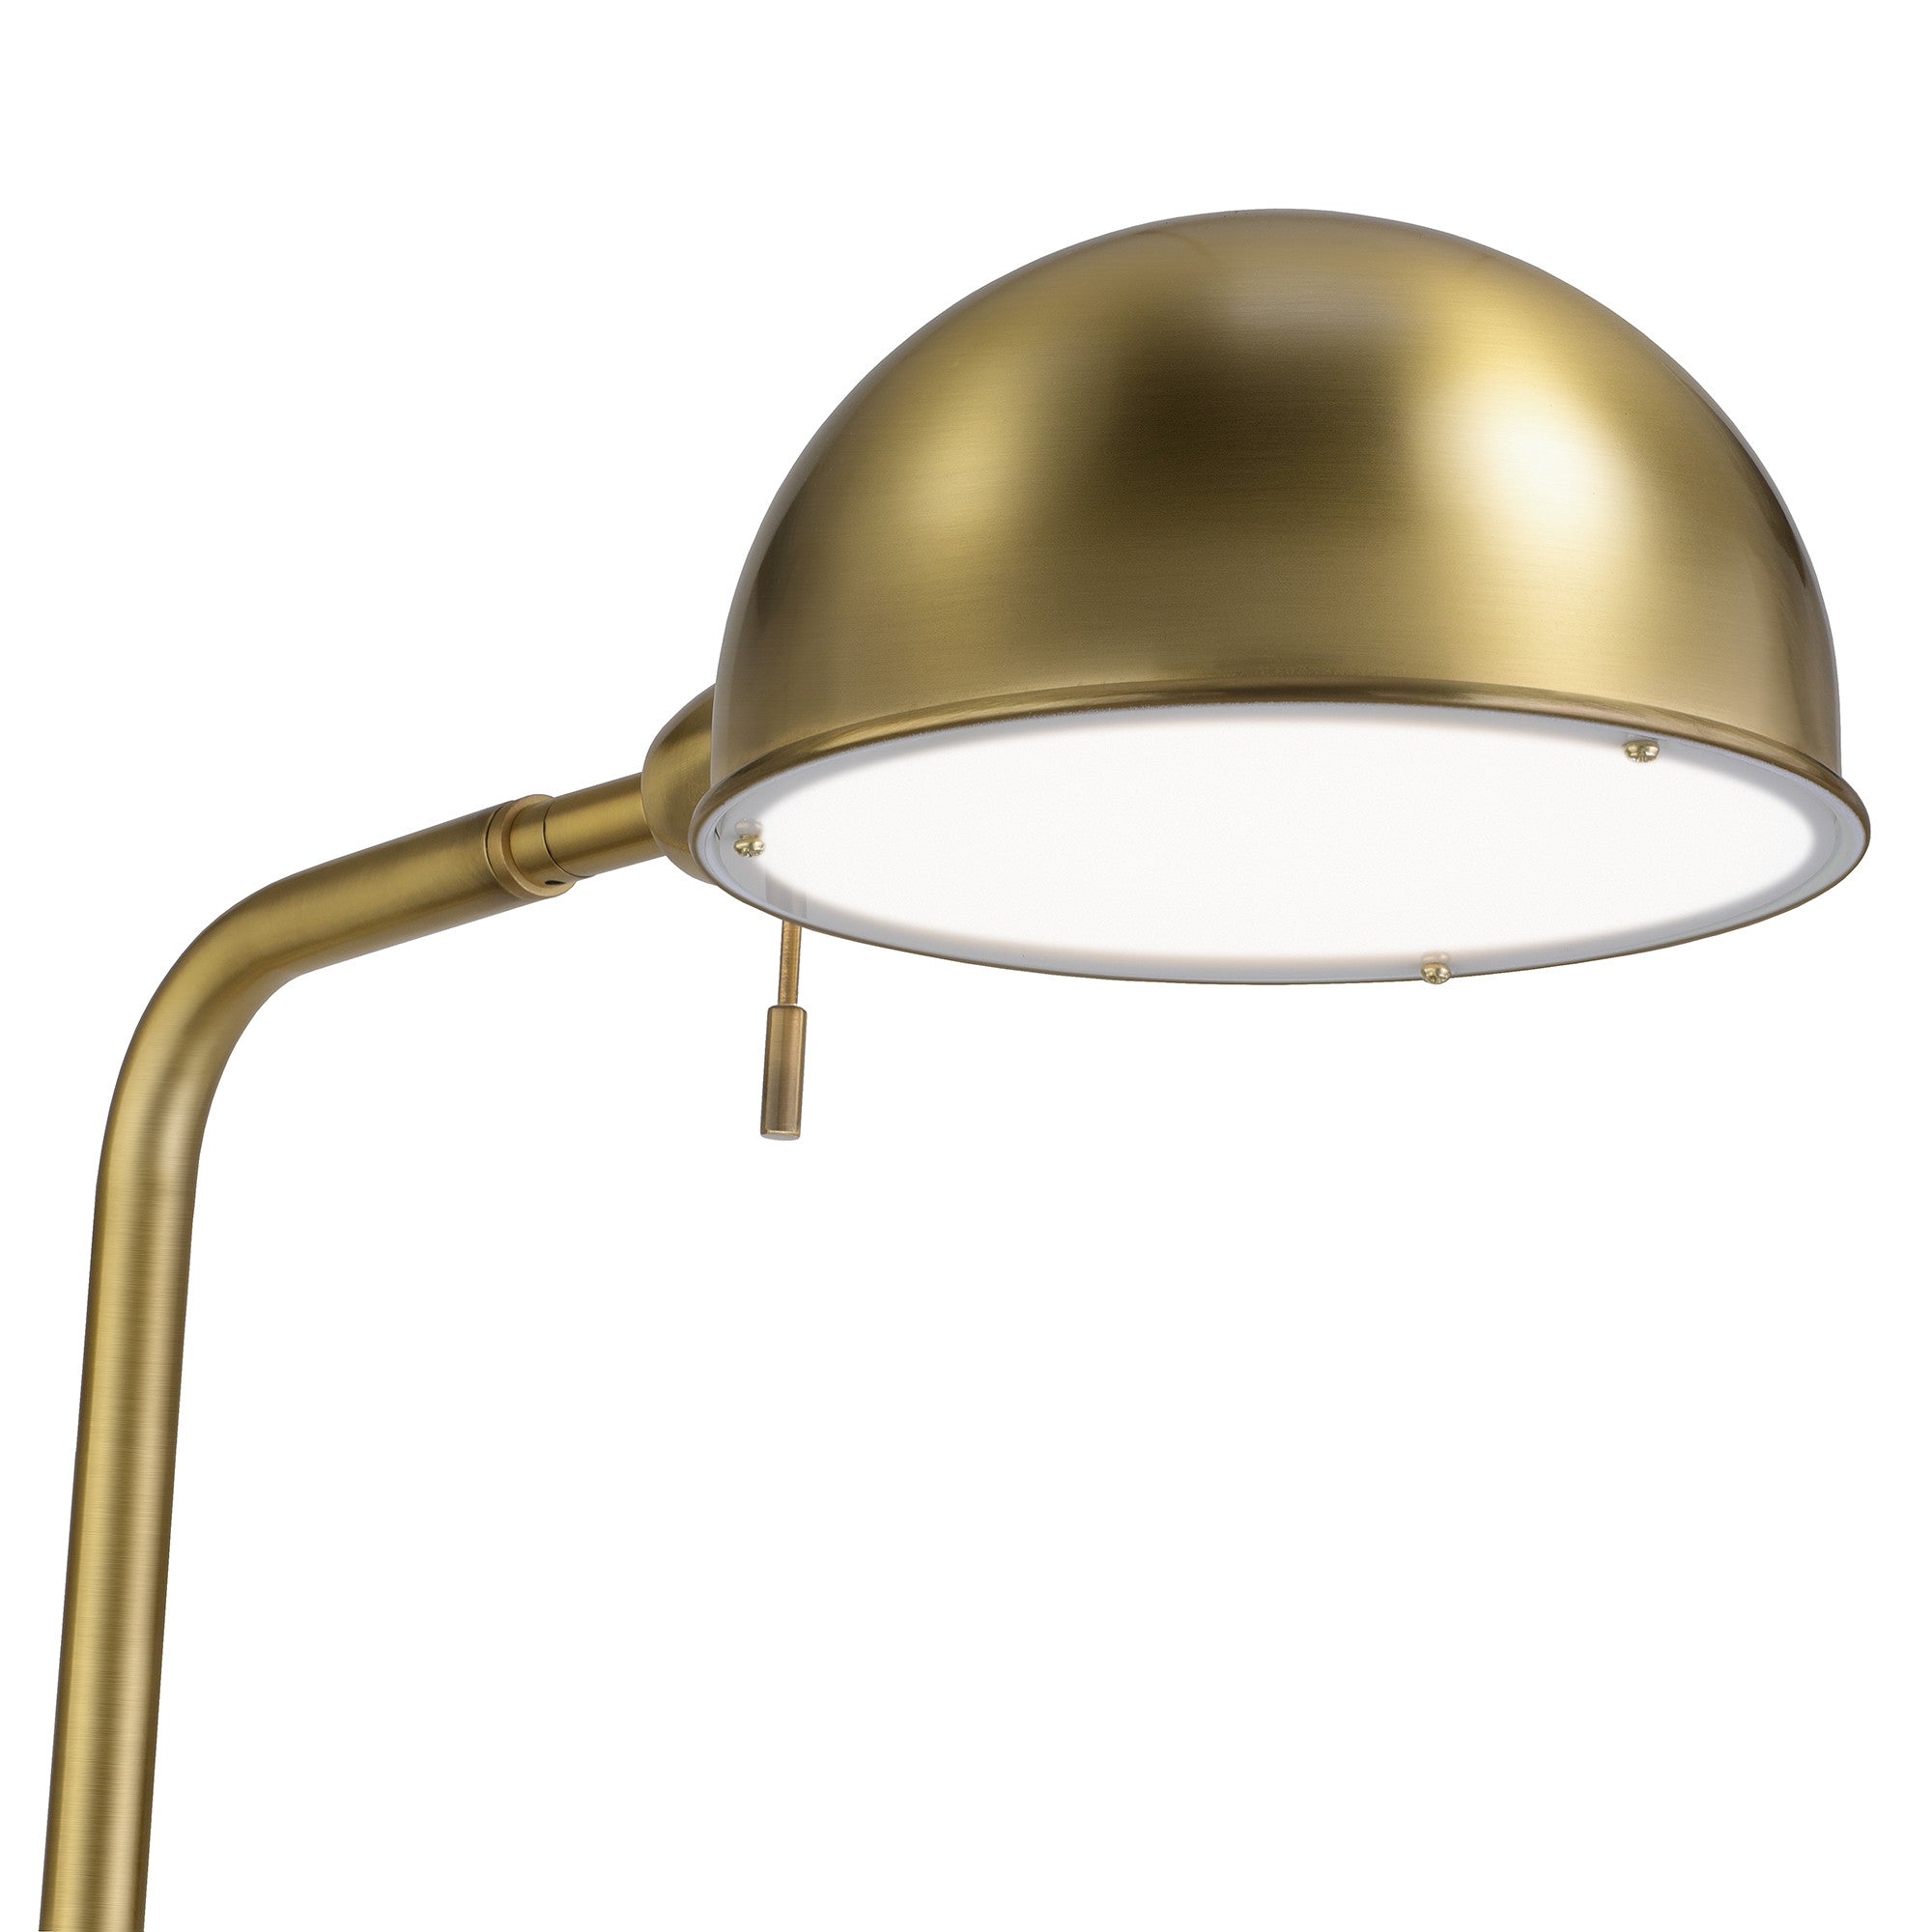 66" Brass Reading Floor Lamp With Gold Dome Shade